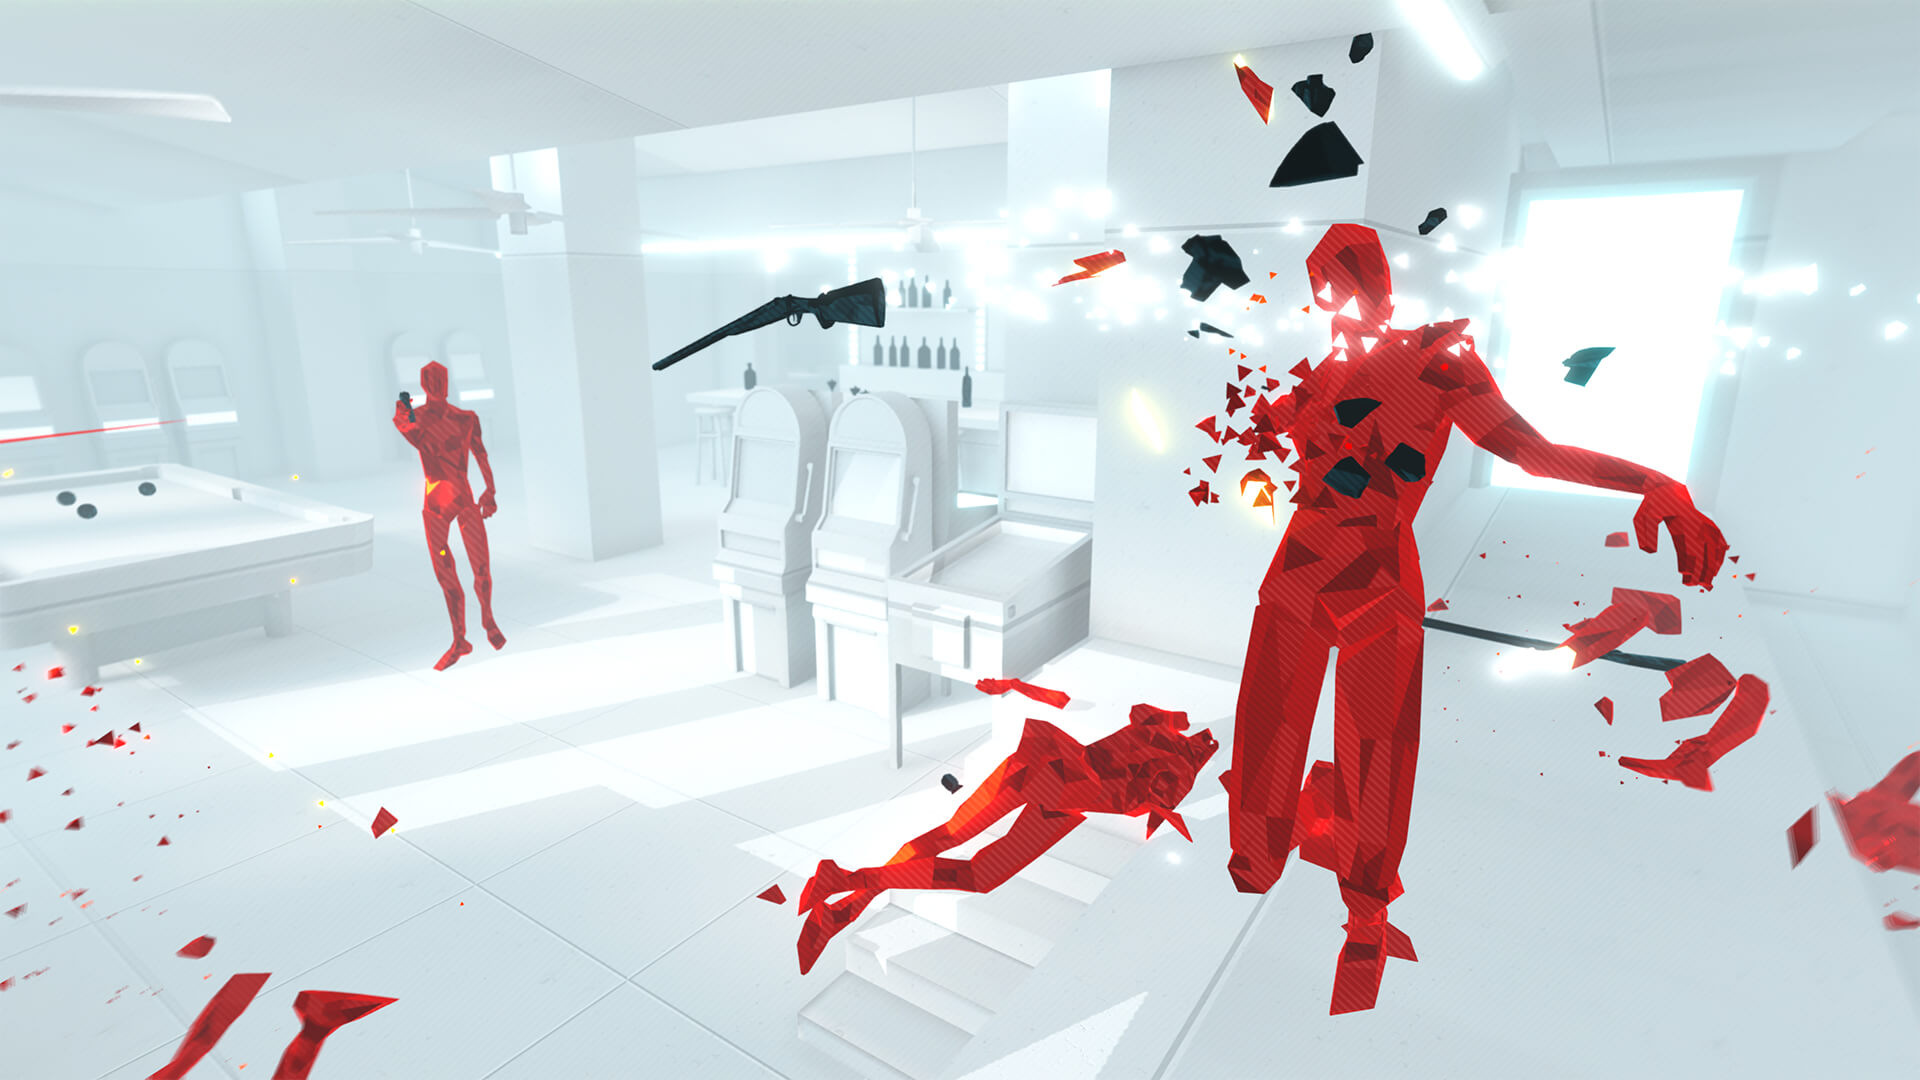 Time-bending first person shooter Superhot is free for today on Epic Games. Image via Epic Games.